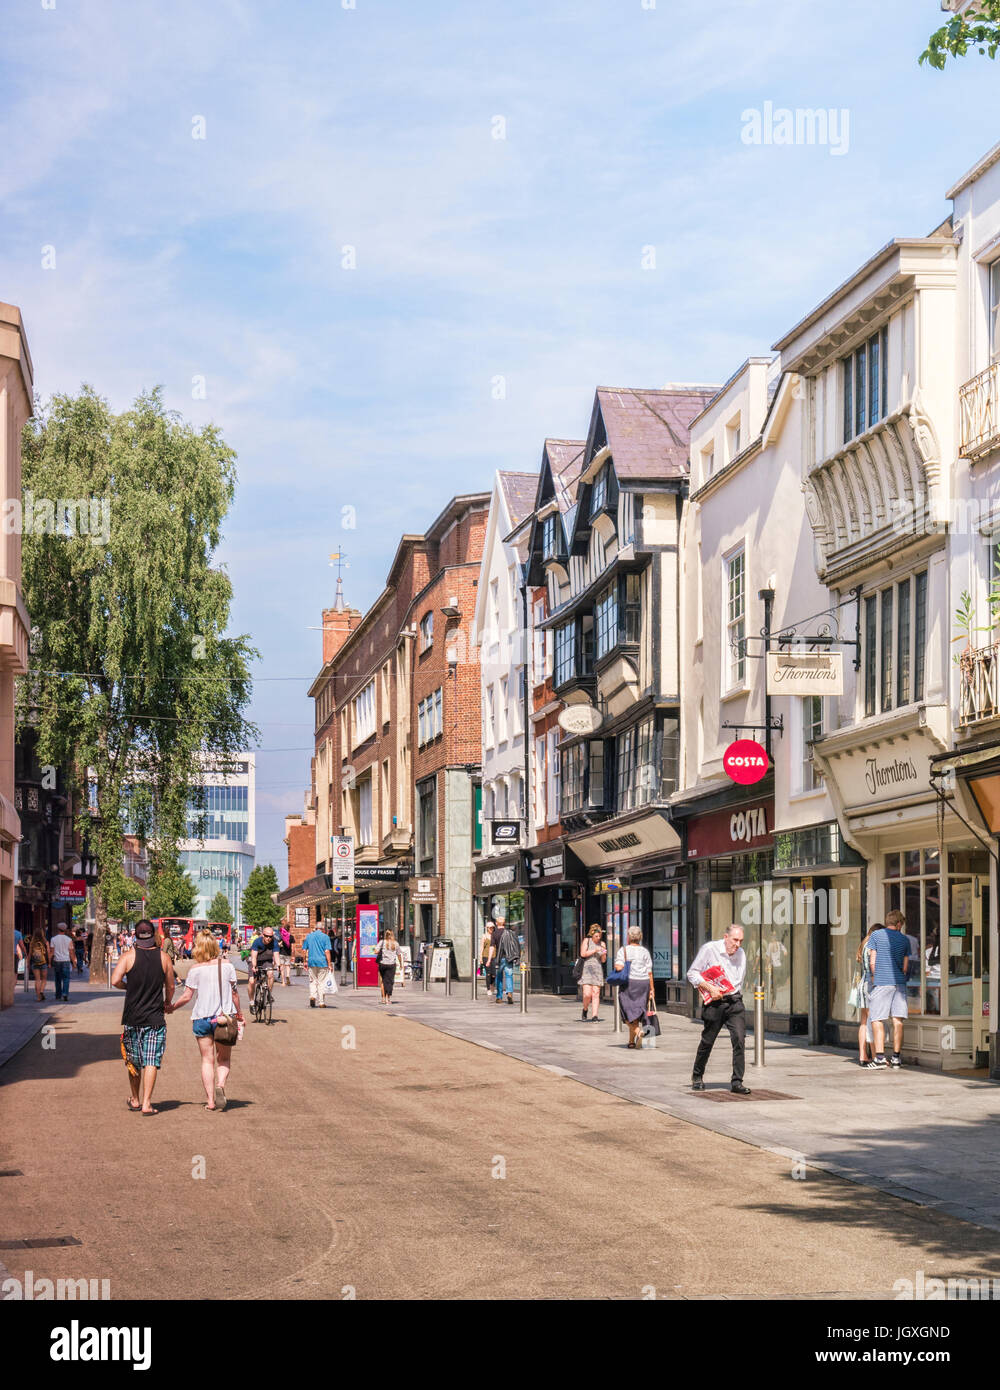 20 June 2017: Exeter, Devon, England, UK - Shopping in the High Street on a fine summer day. Stock Photo